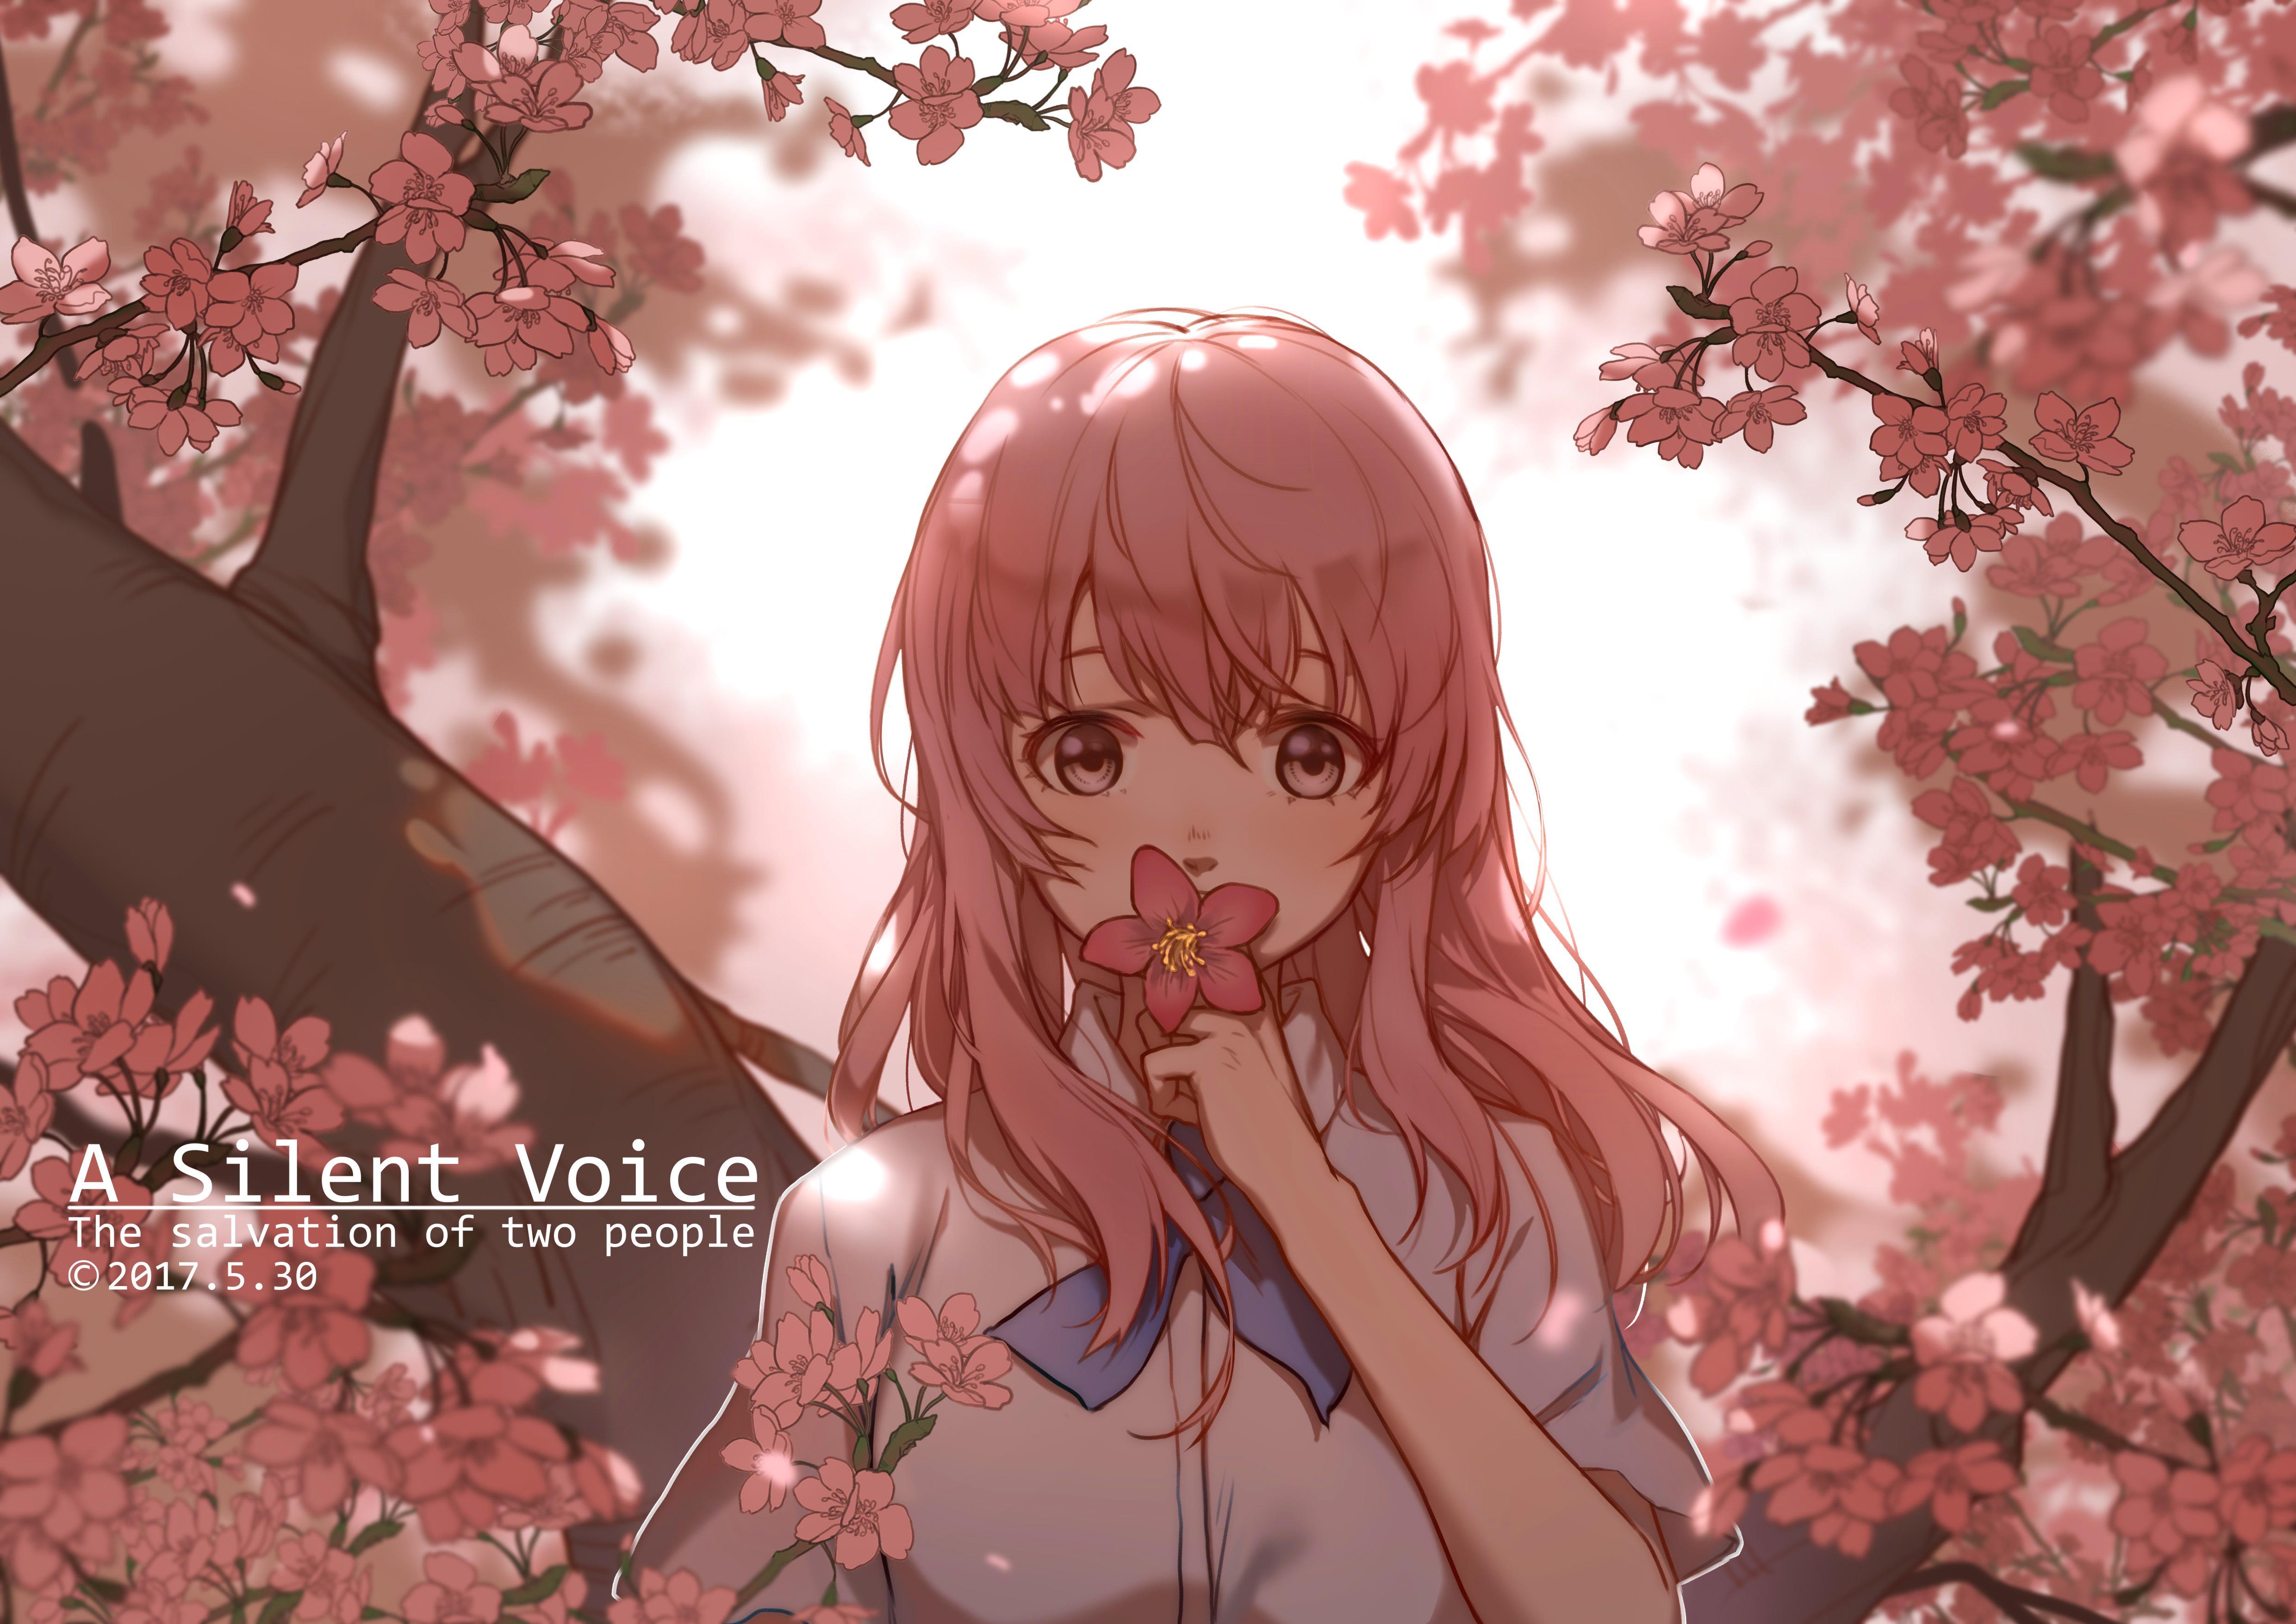 A Silent Voice 4k Wallpapers - Wallpaper Cave